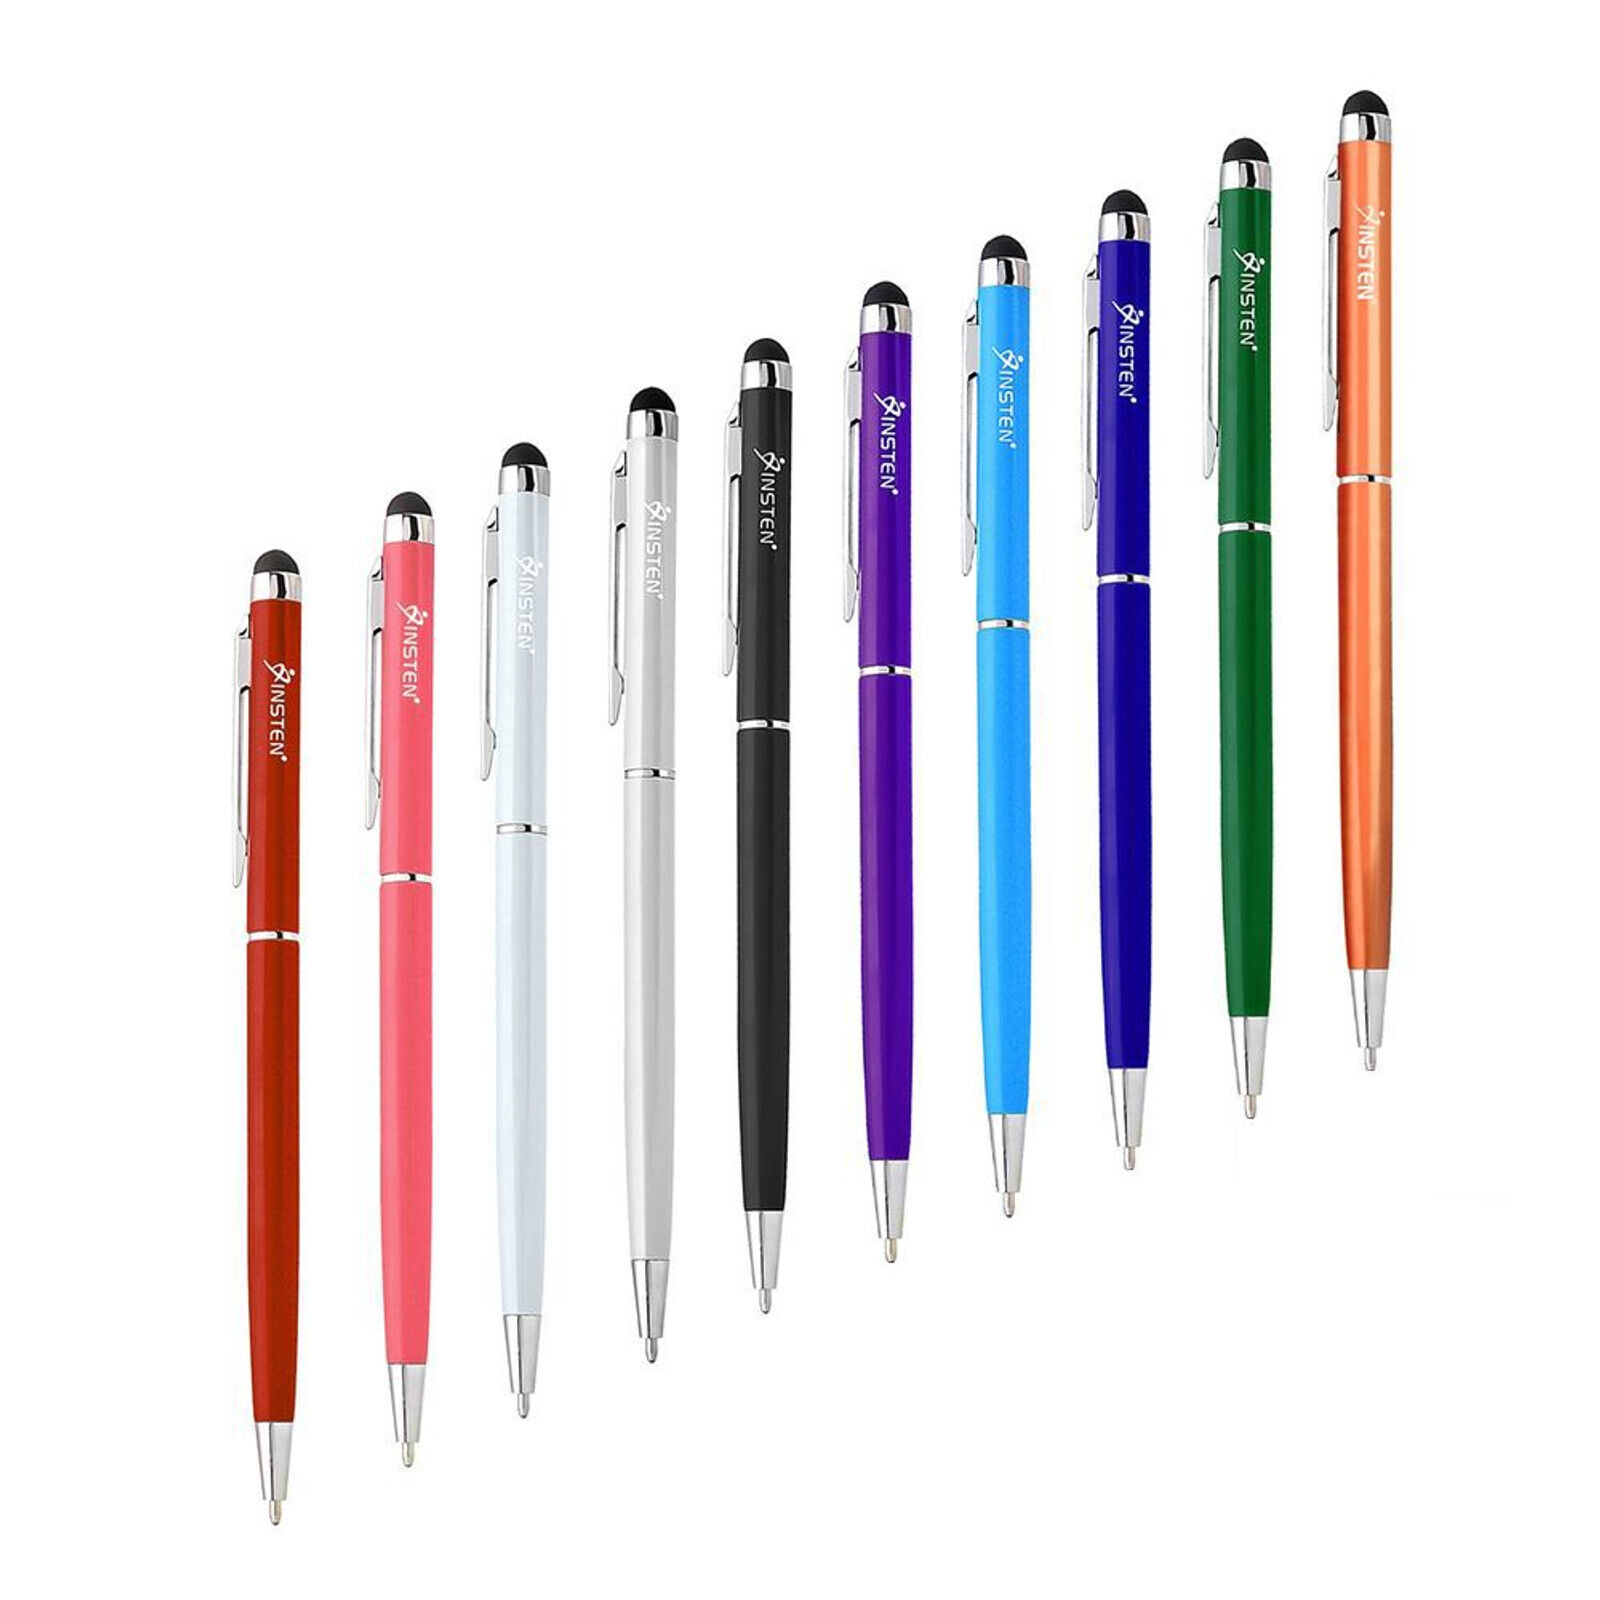 10 Pack 2-in-1 Pencil Stylus Touch Screen Ballpoint Pen for iPad, iPhone, Tablet